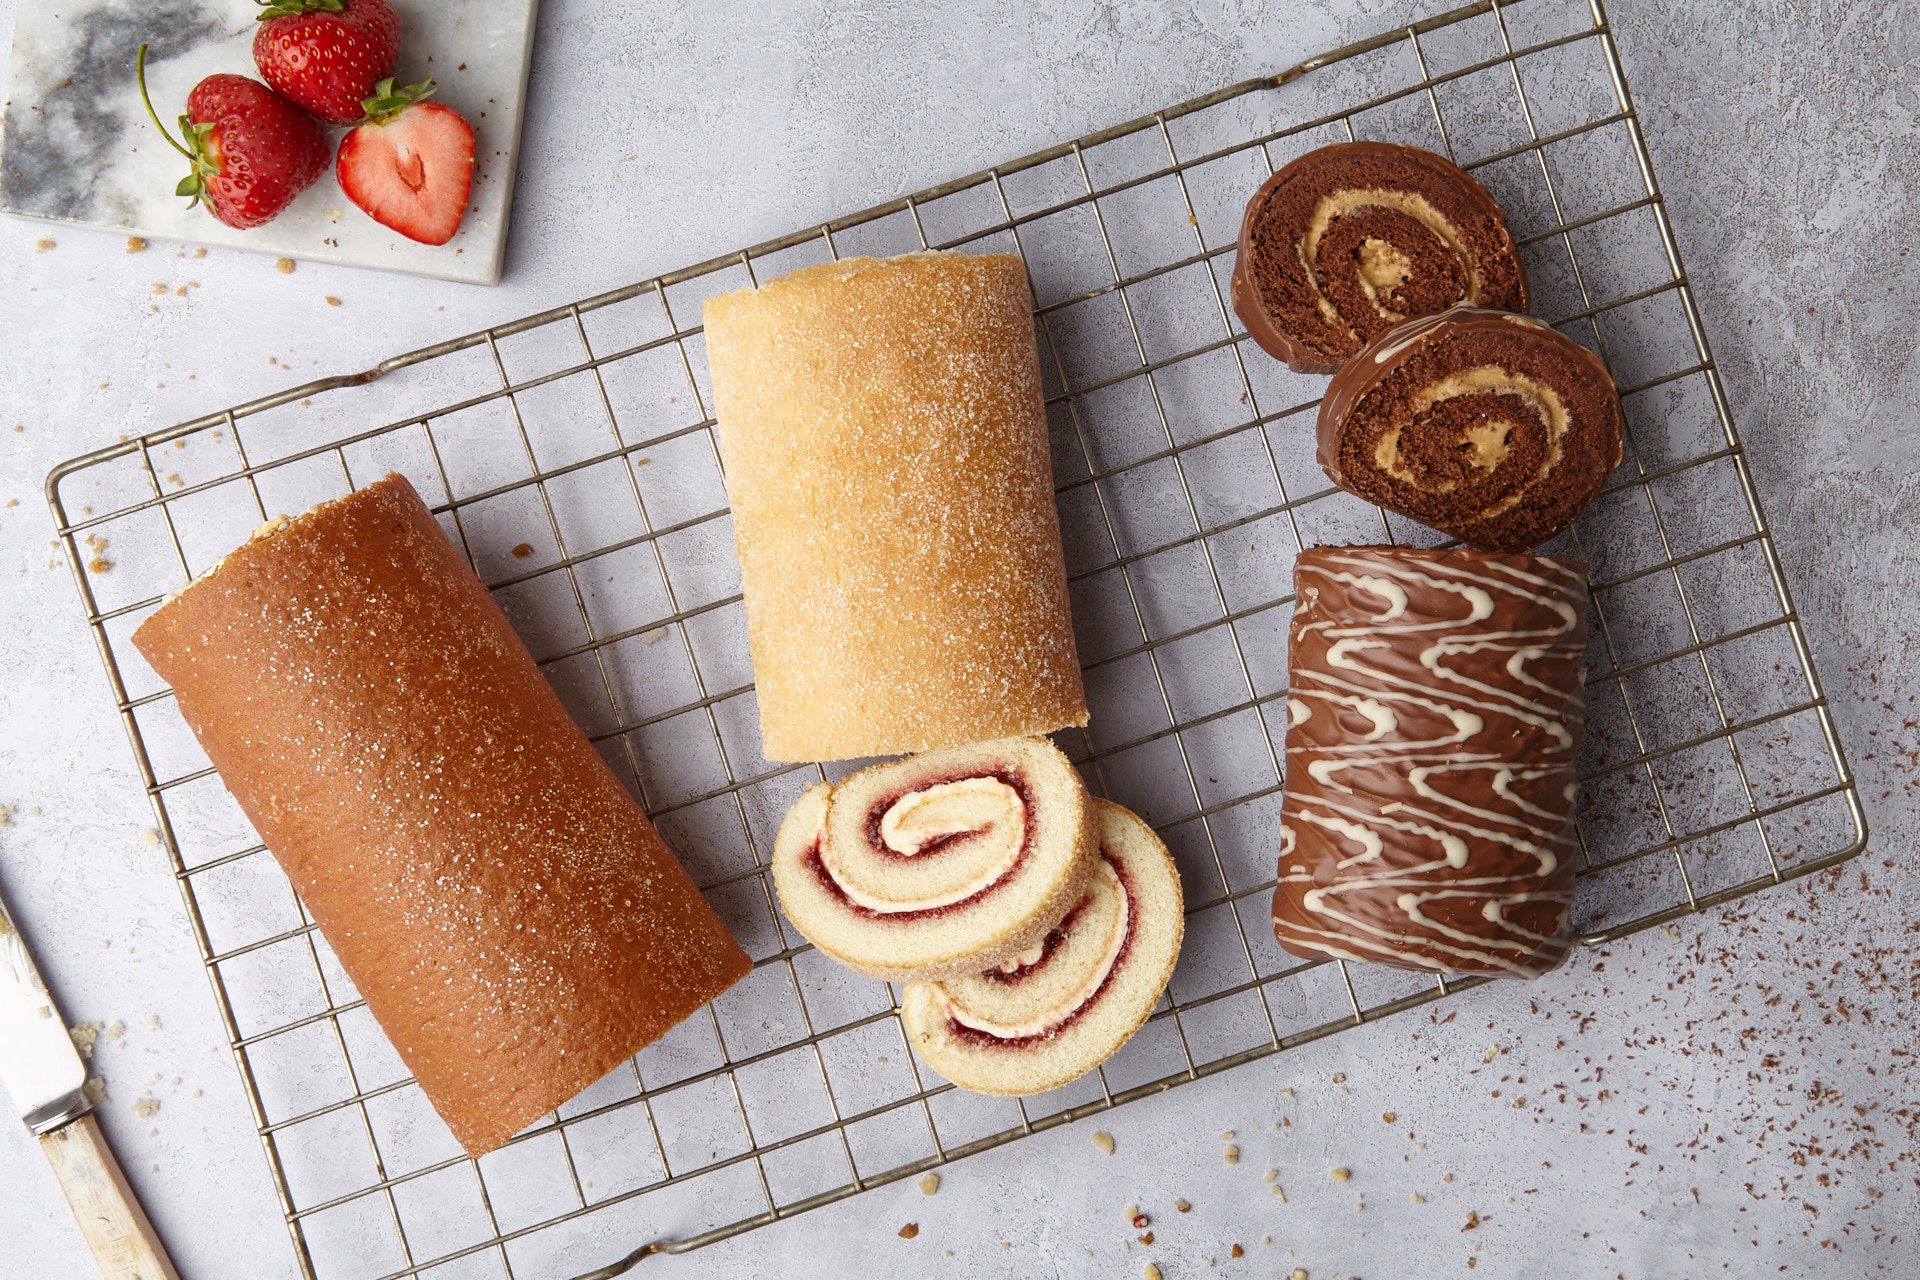 Swiss Roll High quality sponge, filling and flavour all rolled into one!